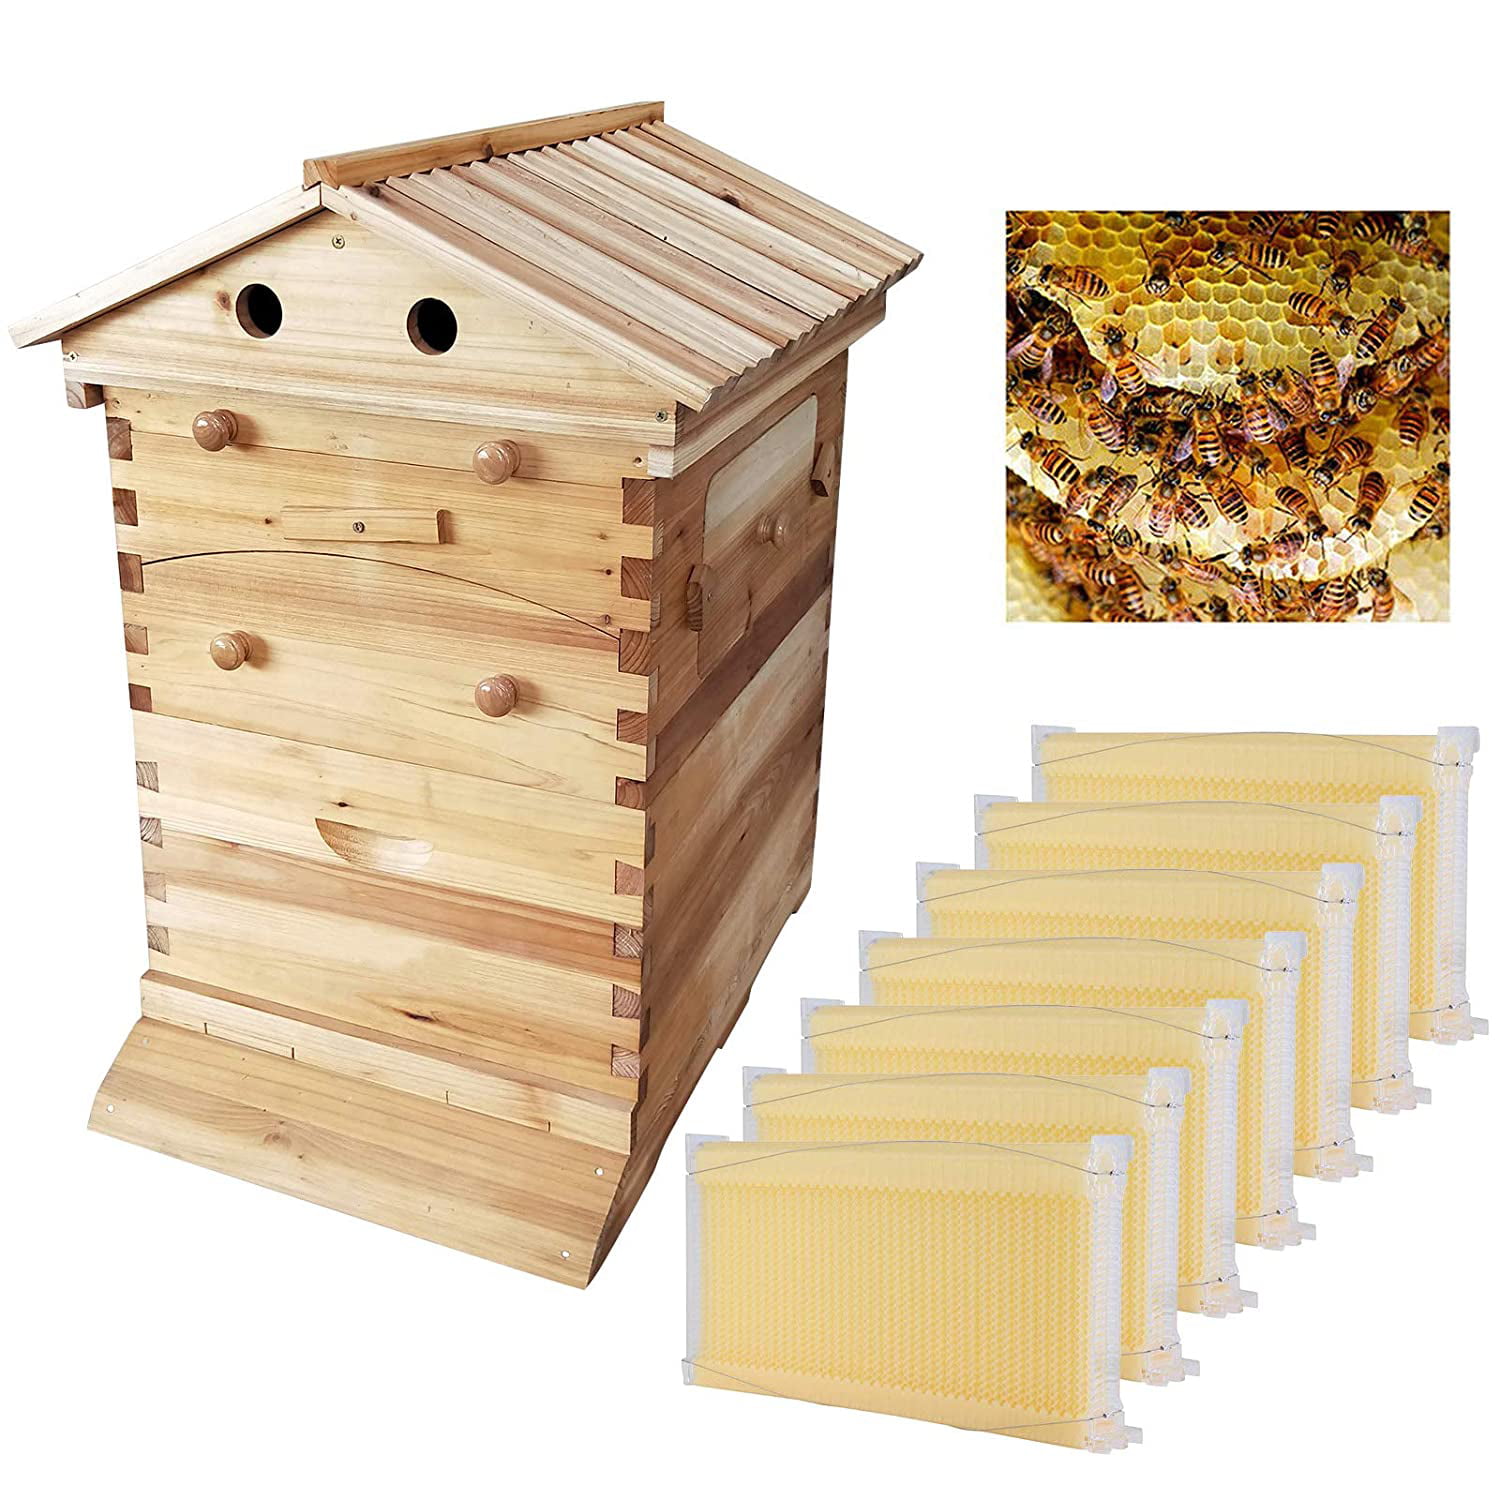 Wooden Bee Hive Box Beekeeping Beehive House For 7PCS Auto Flowing Honey Frame 